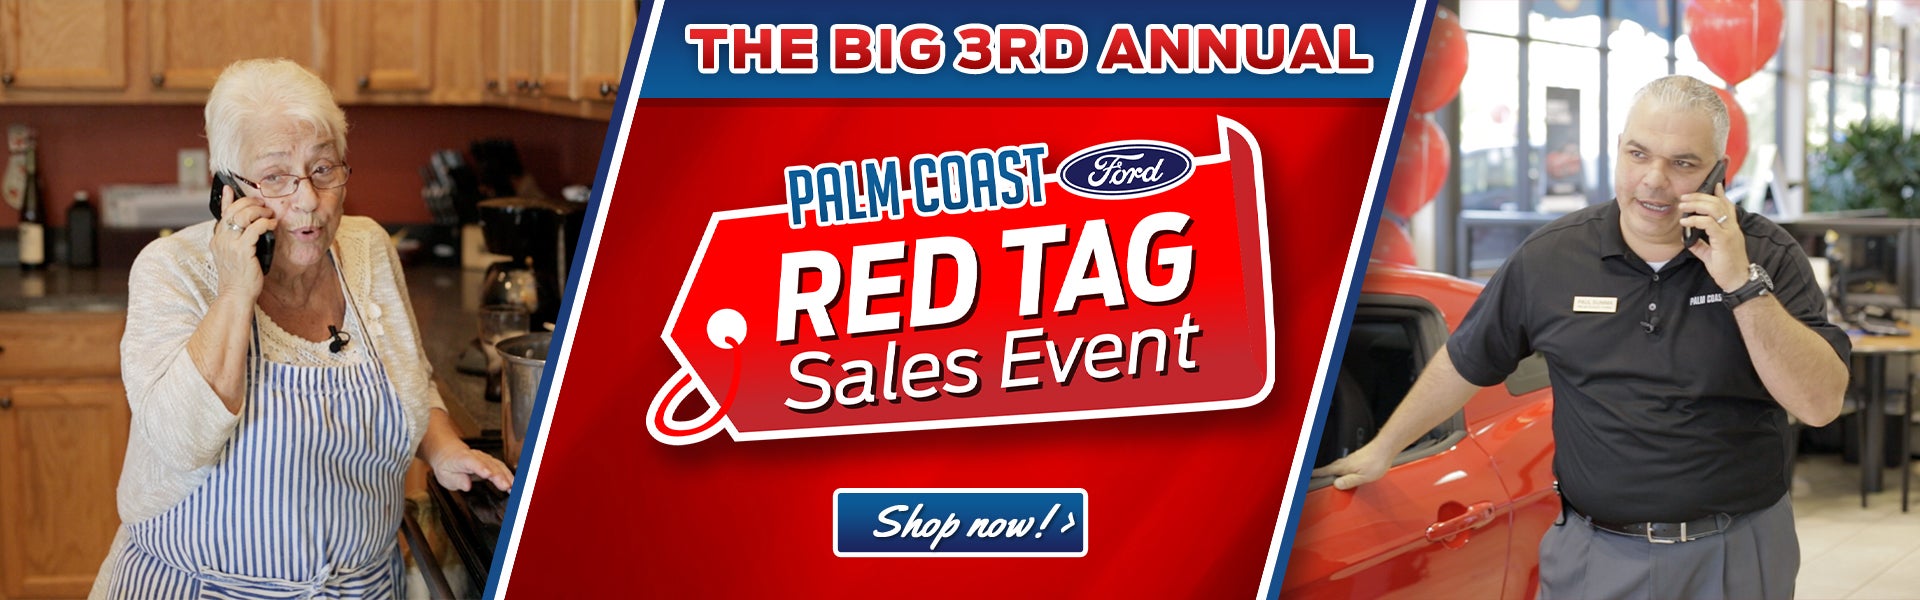 Red Tag Sales Event